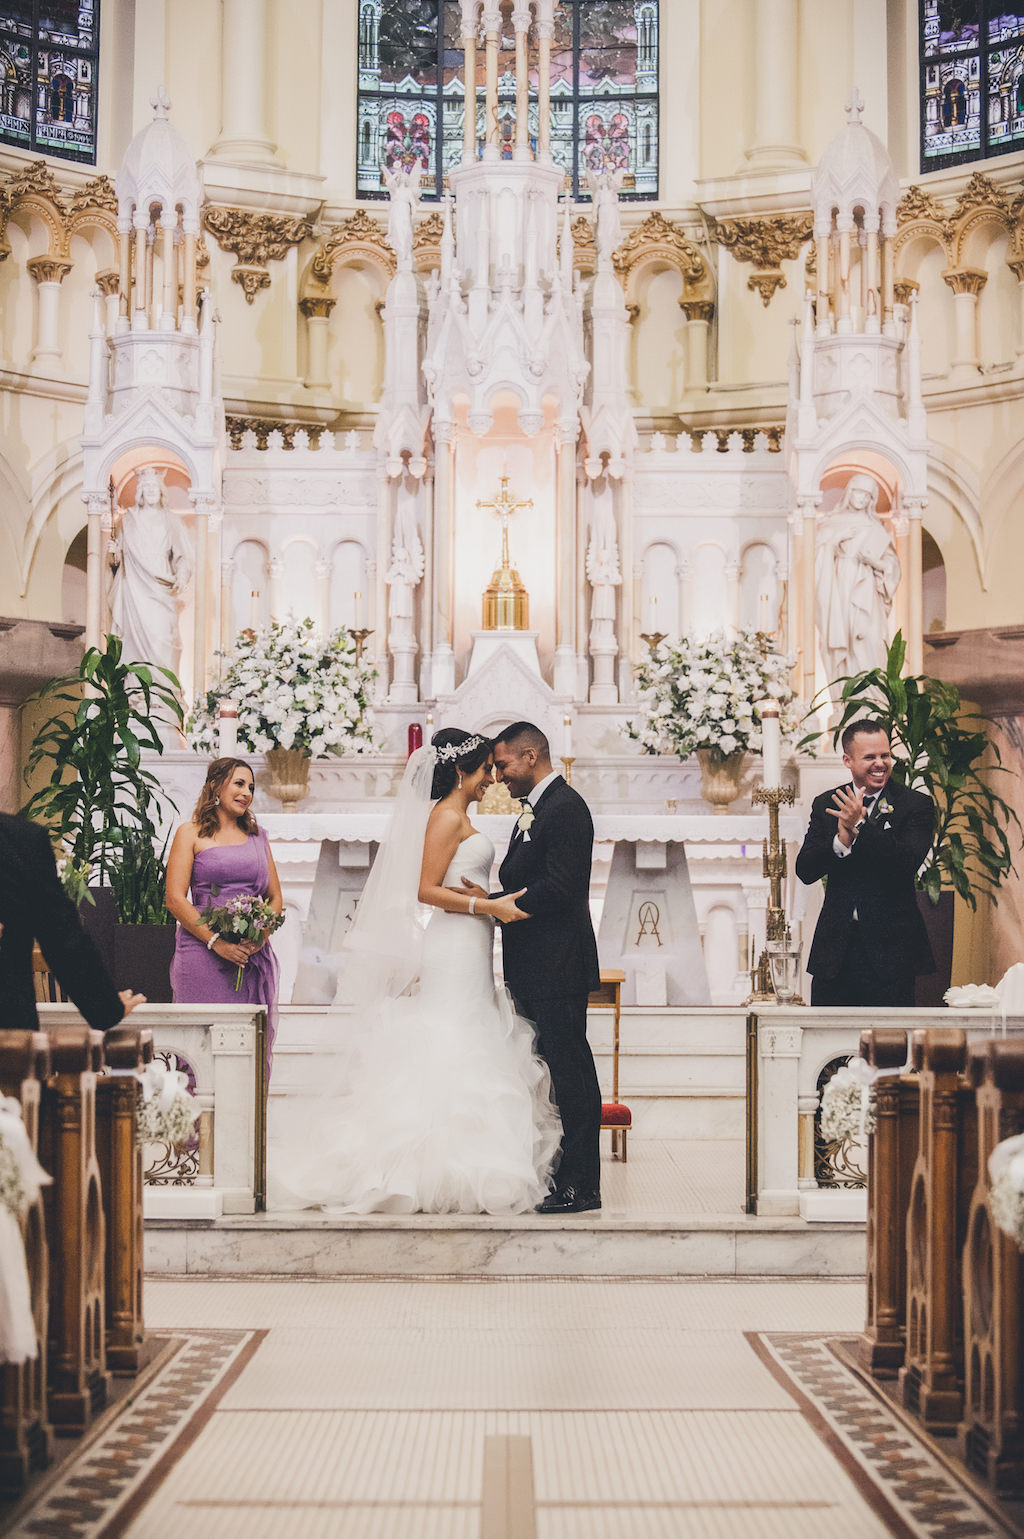 Traditional Church Wedding Ceremony, With White and Greenery Flower Arrangements, Bridesmaid in Strapless Purple Vera Wang Dress, Bride in Pronovias Layered Mermaid Strapless Dress | Downtown Tampa Venue Sacred Heart Catholic Church